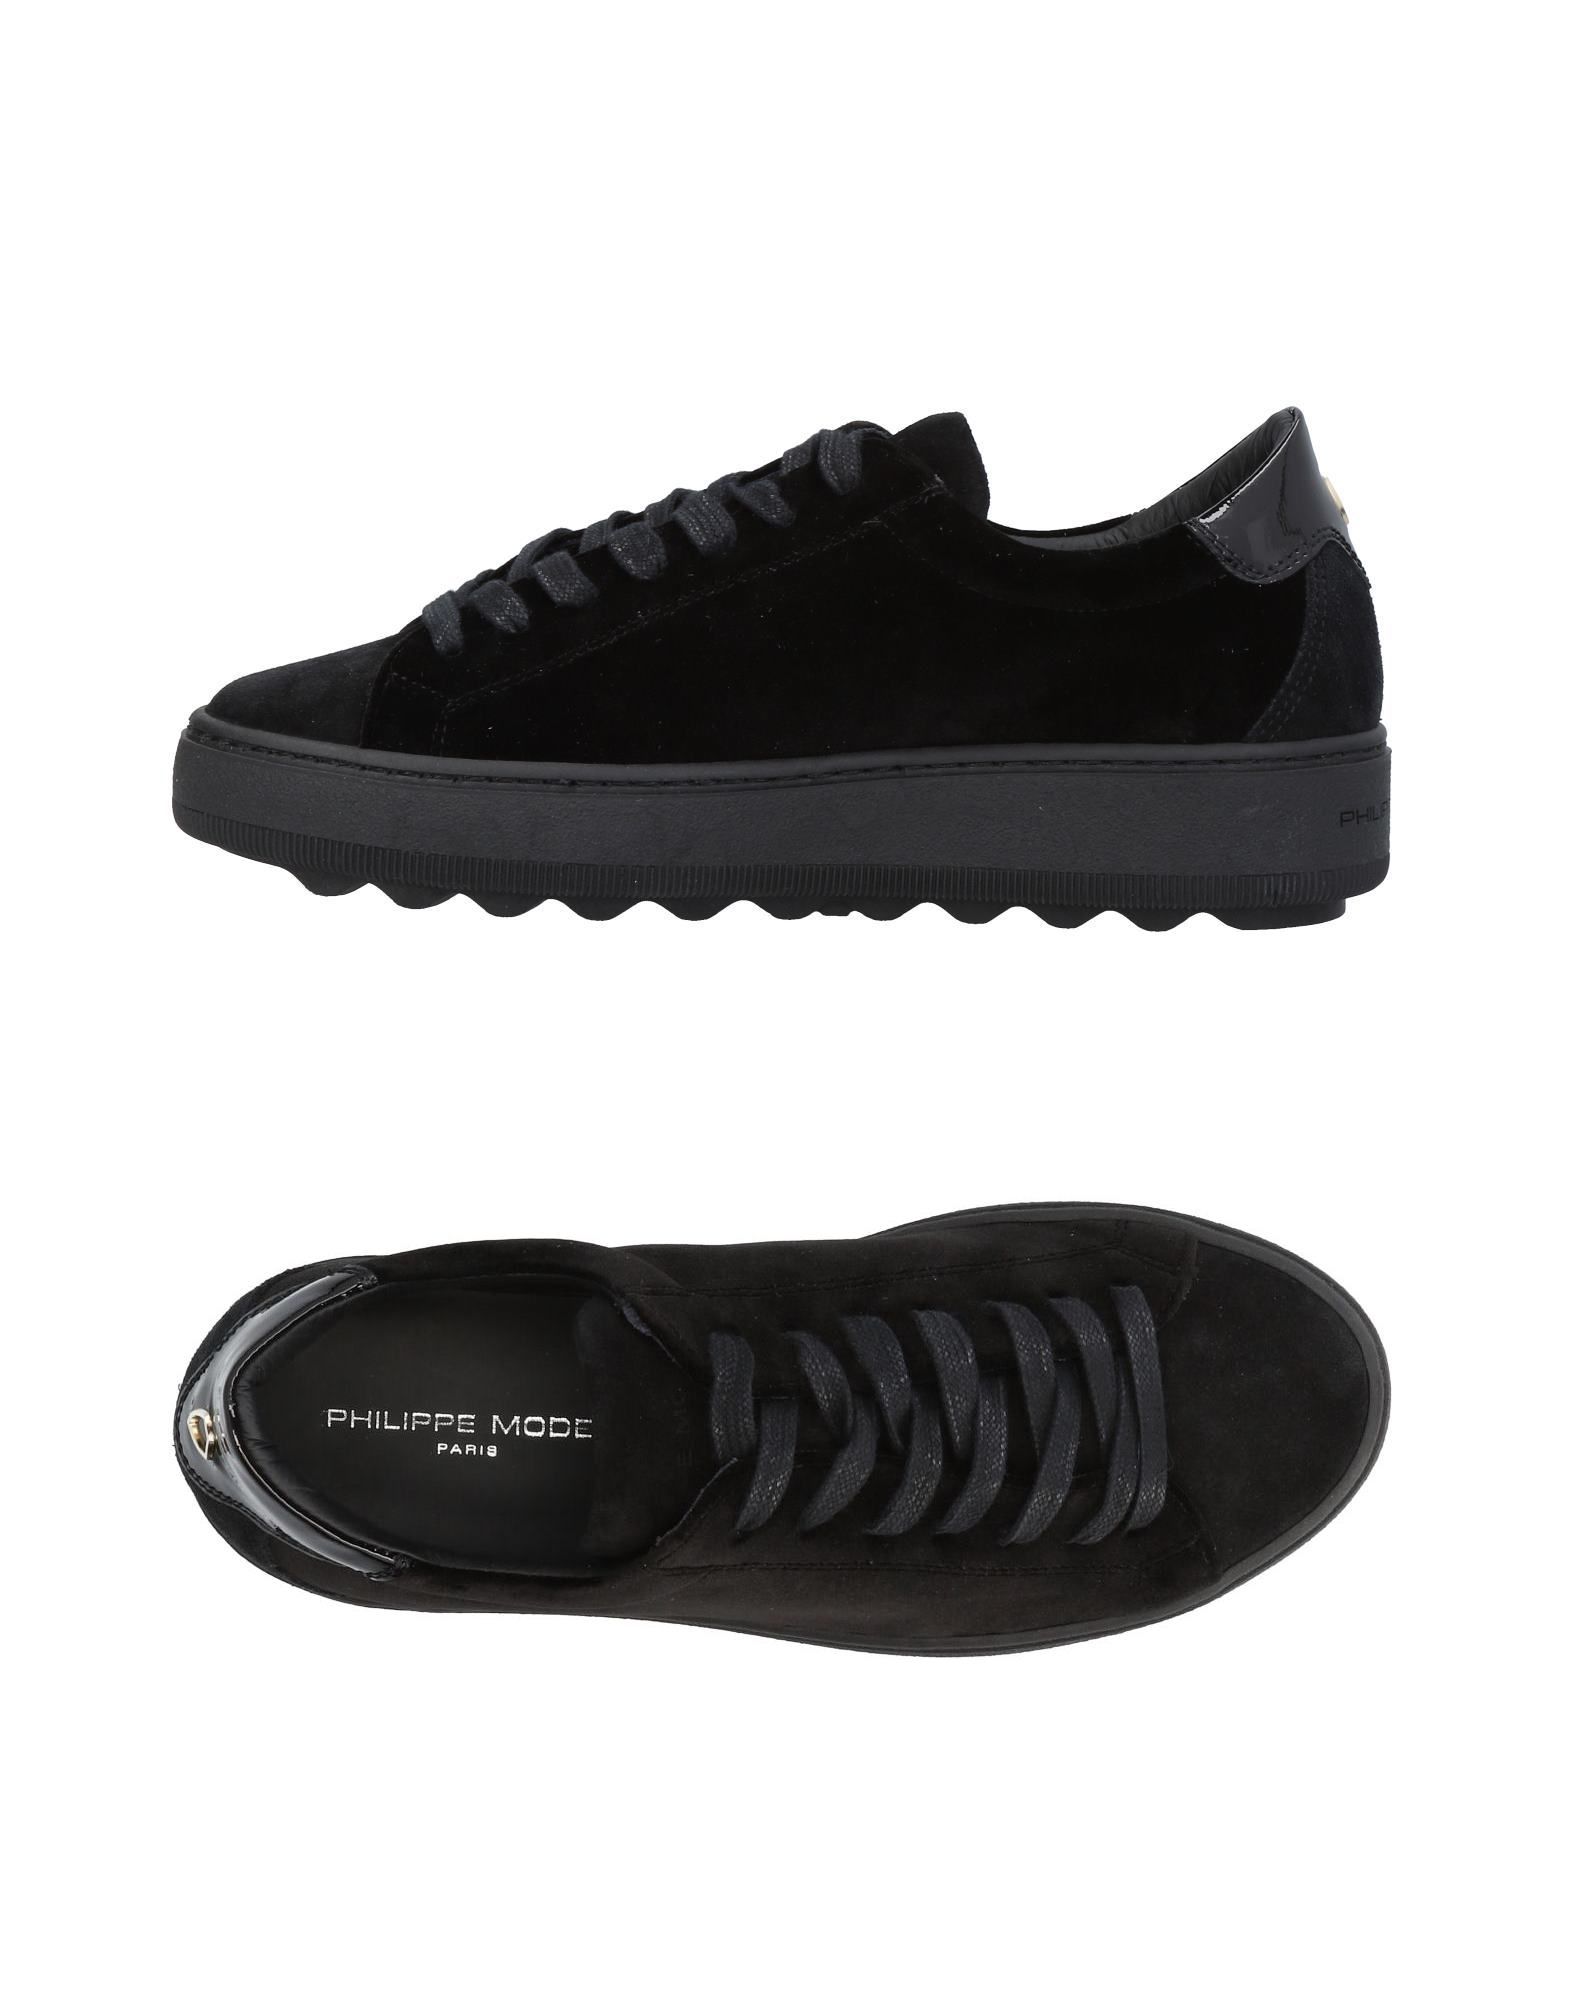 PHILIPPE MODEL PHILIPPE MODEL WOMAN SNEAKERS BLACK SIZE 7 TEXTILE FIBERS, LEATHER,11423261KT 11